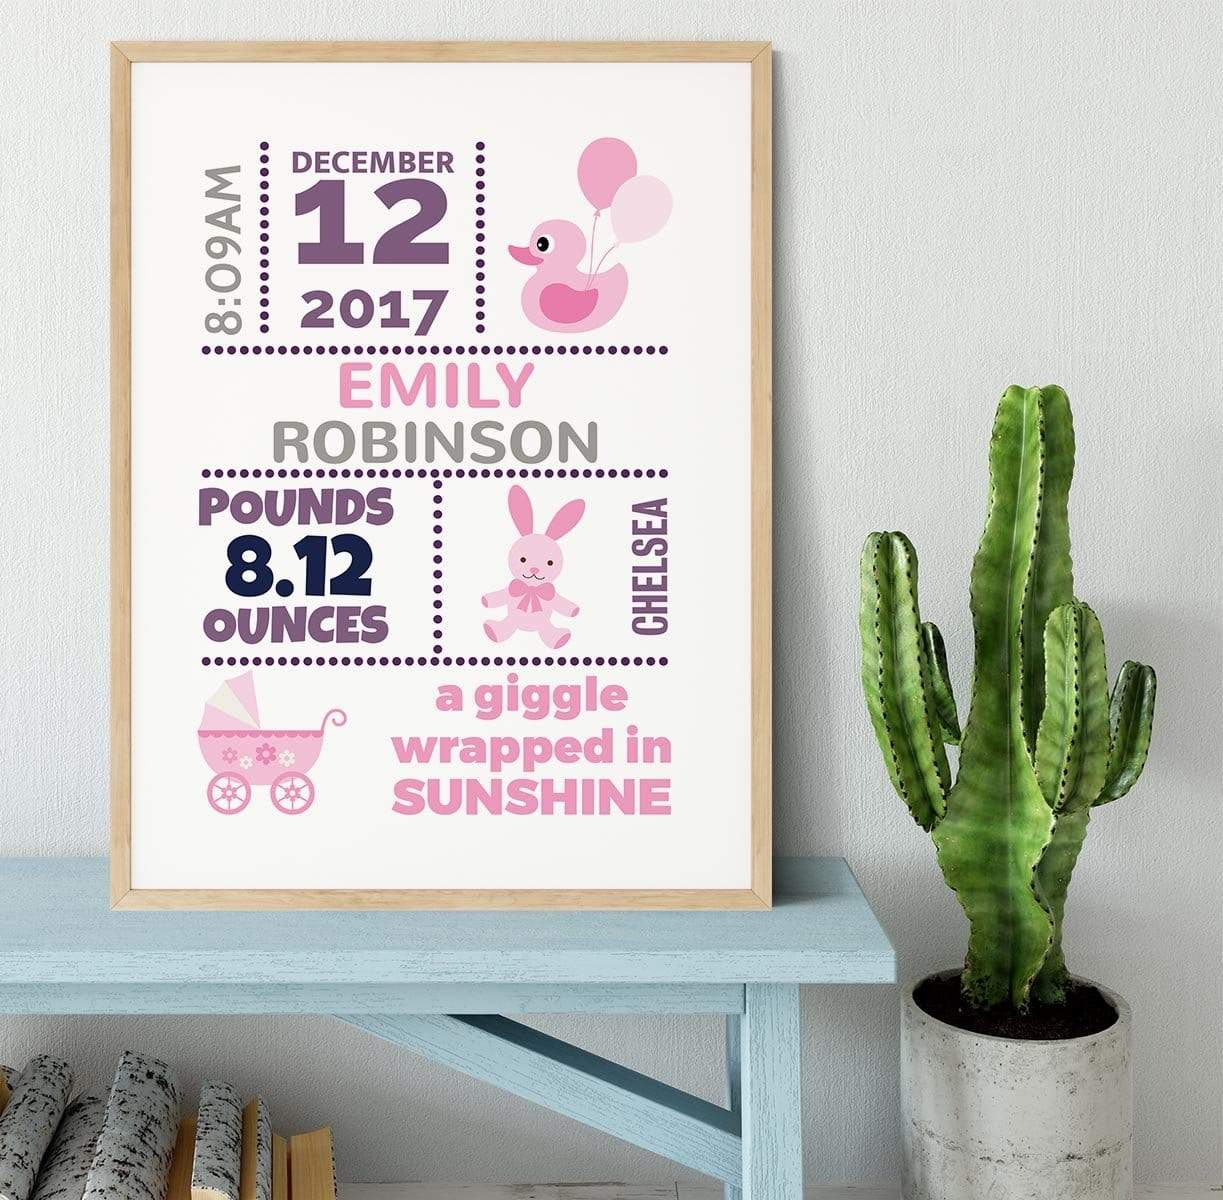 A Giggle Wrapped in Sunshine Framed Print